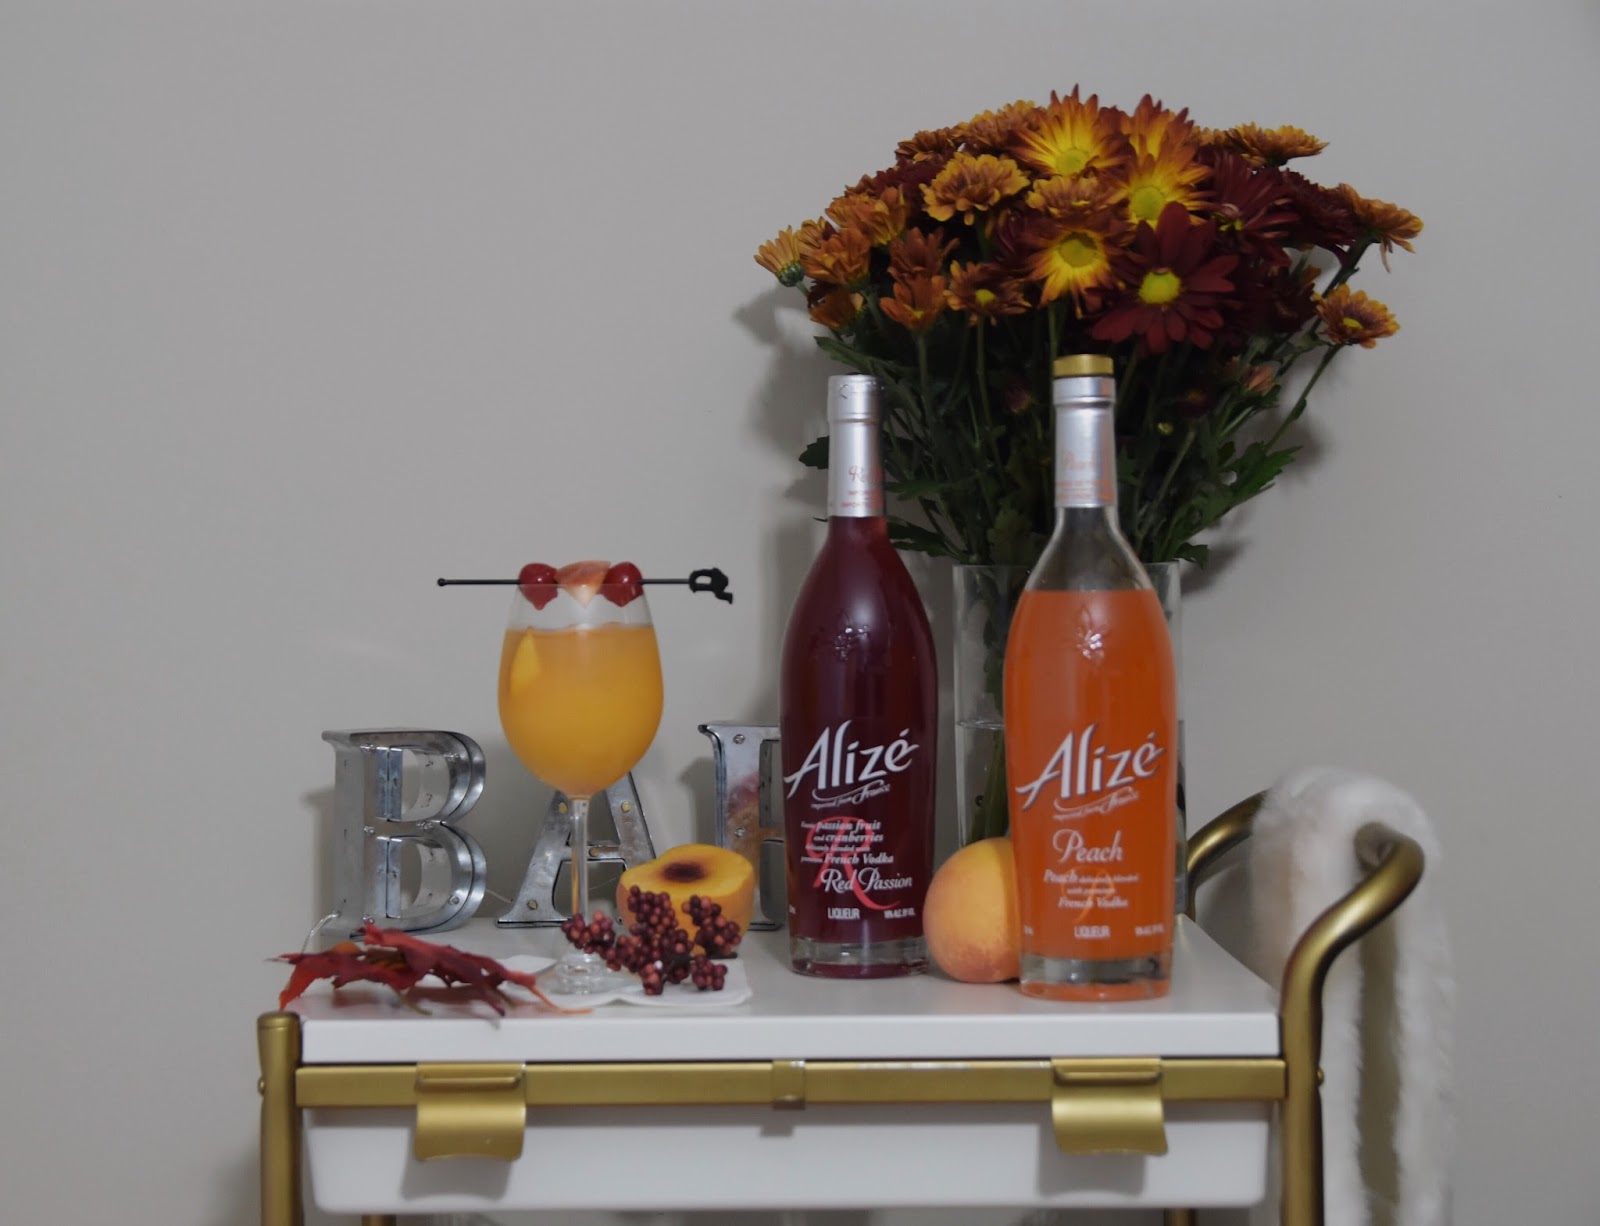 My Favorite Fall Cocktail, Alize, cocktail recipes, peaches, drinks with Alize, fall, peach, passion fruit, french vodka